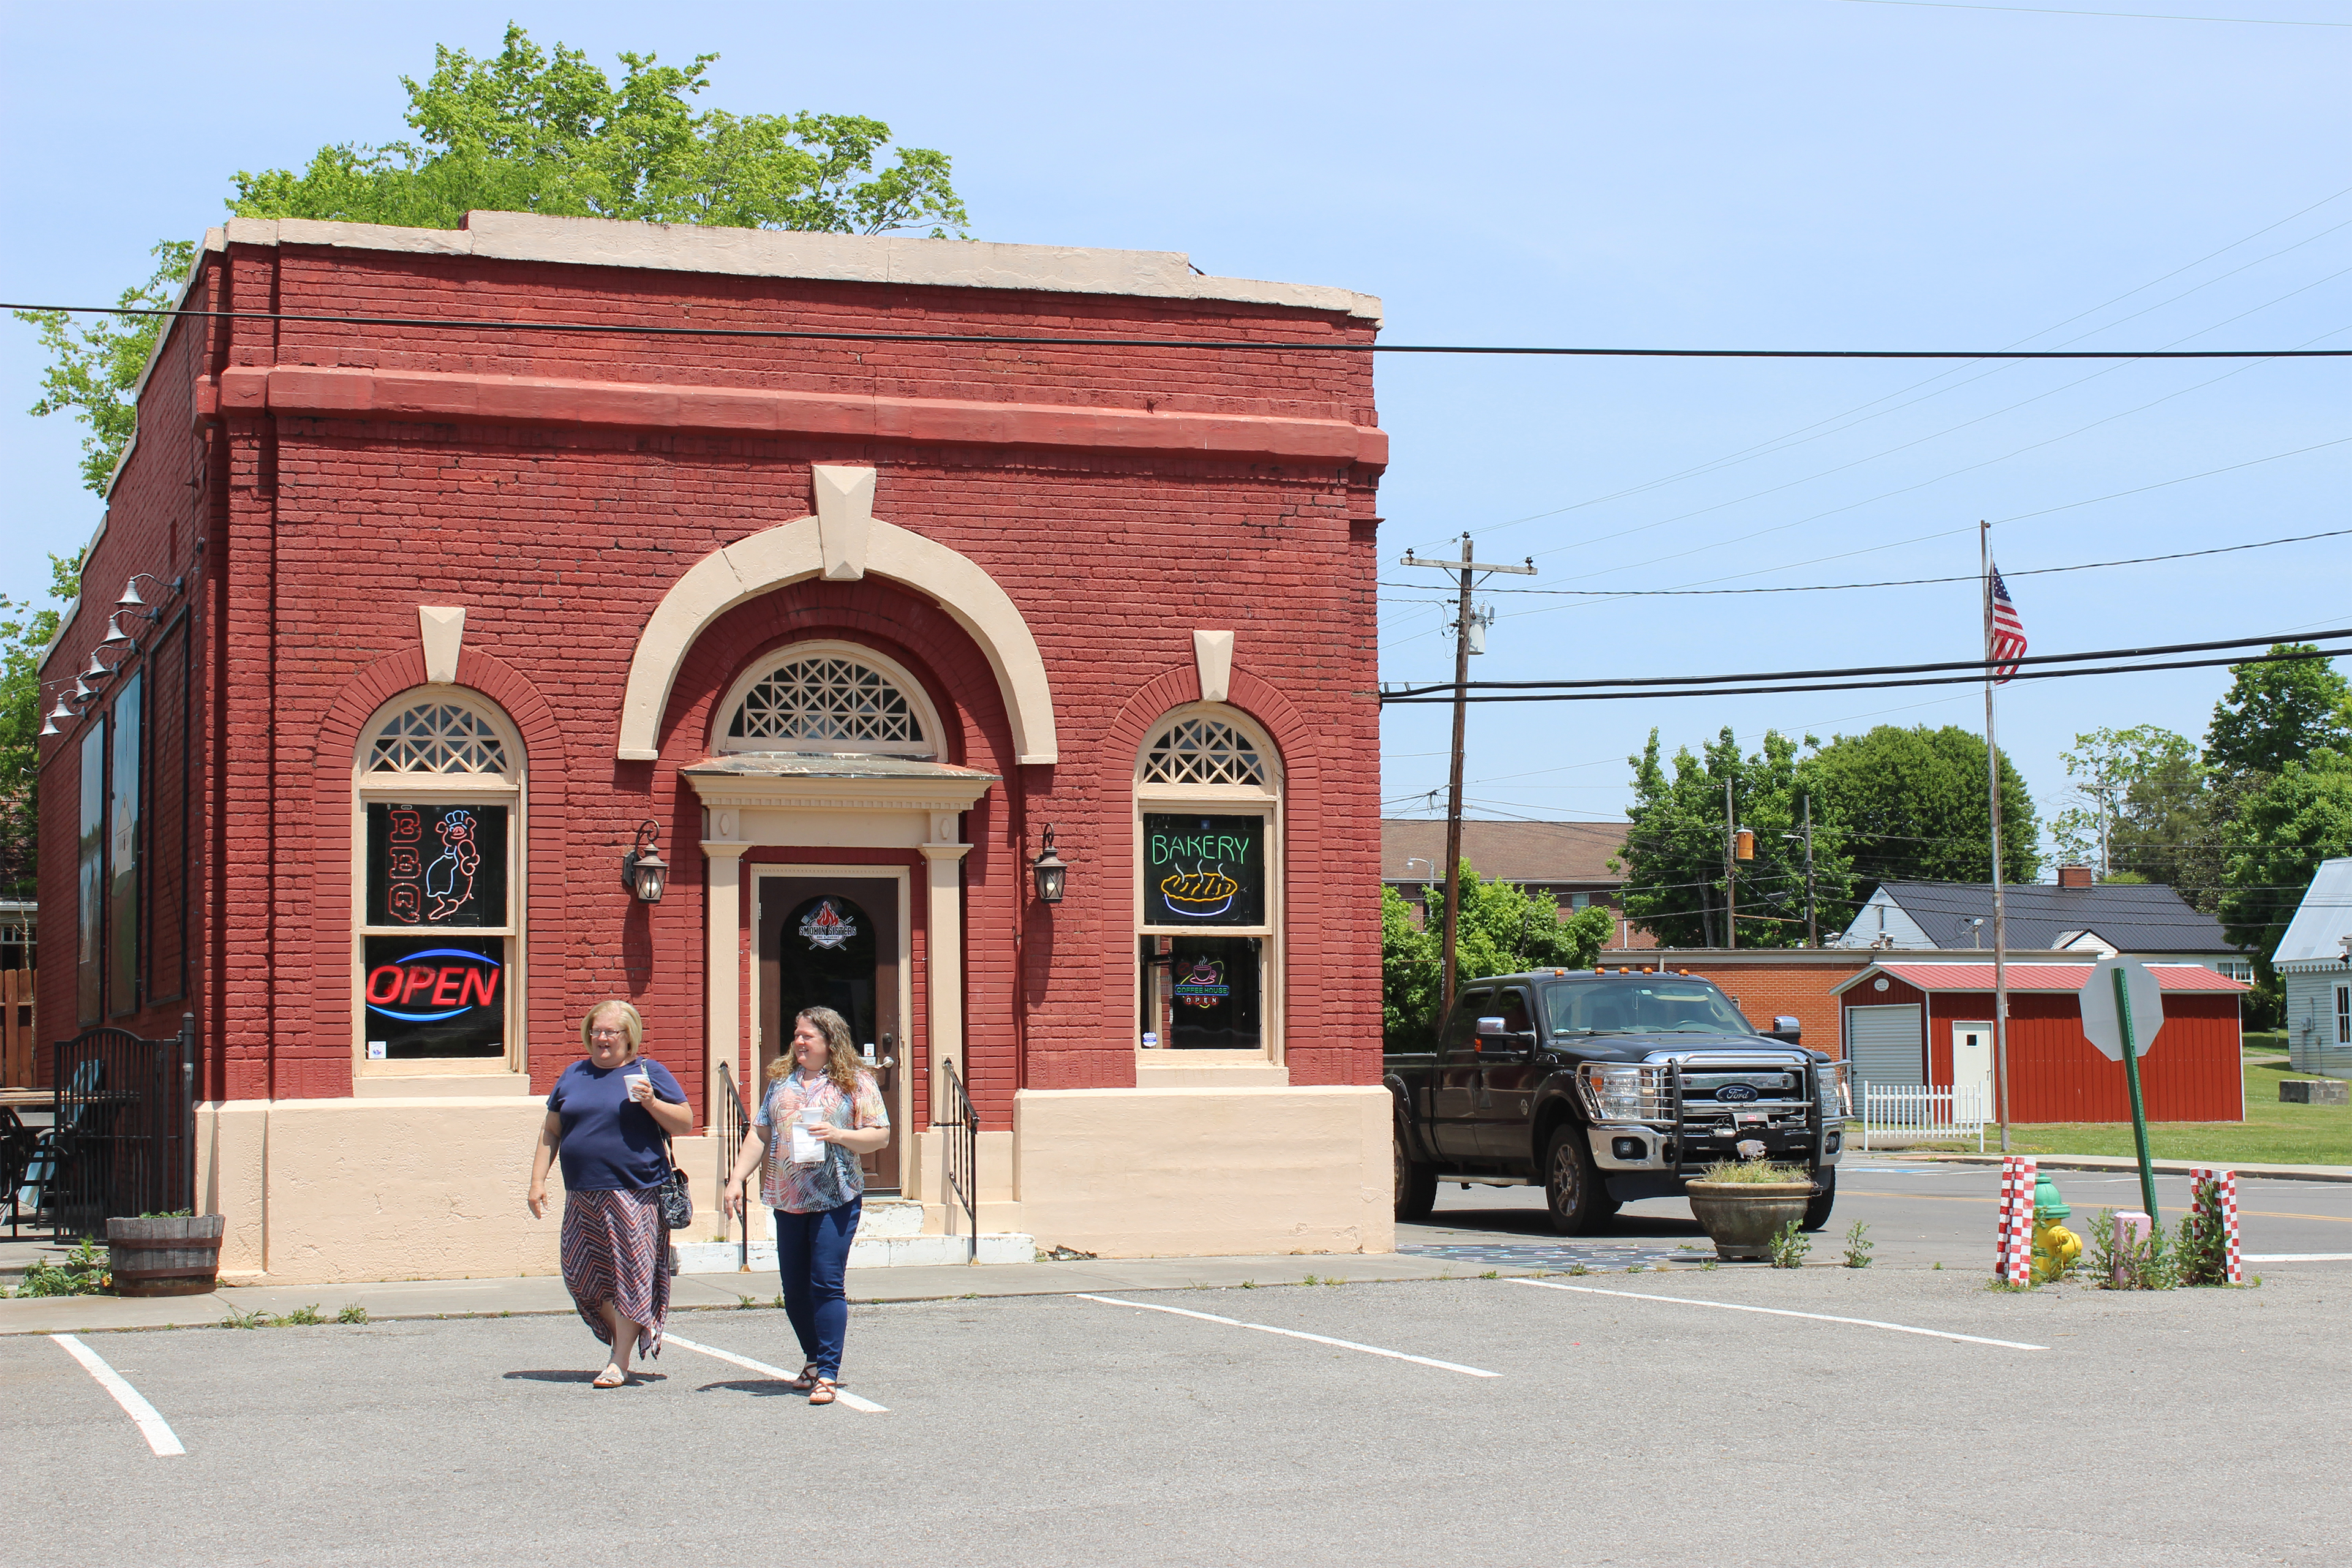 Two people walk past a building in Decatur, Tennessee on a sunny day.